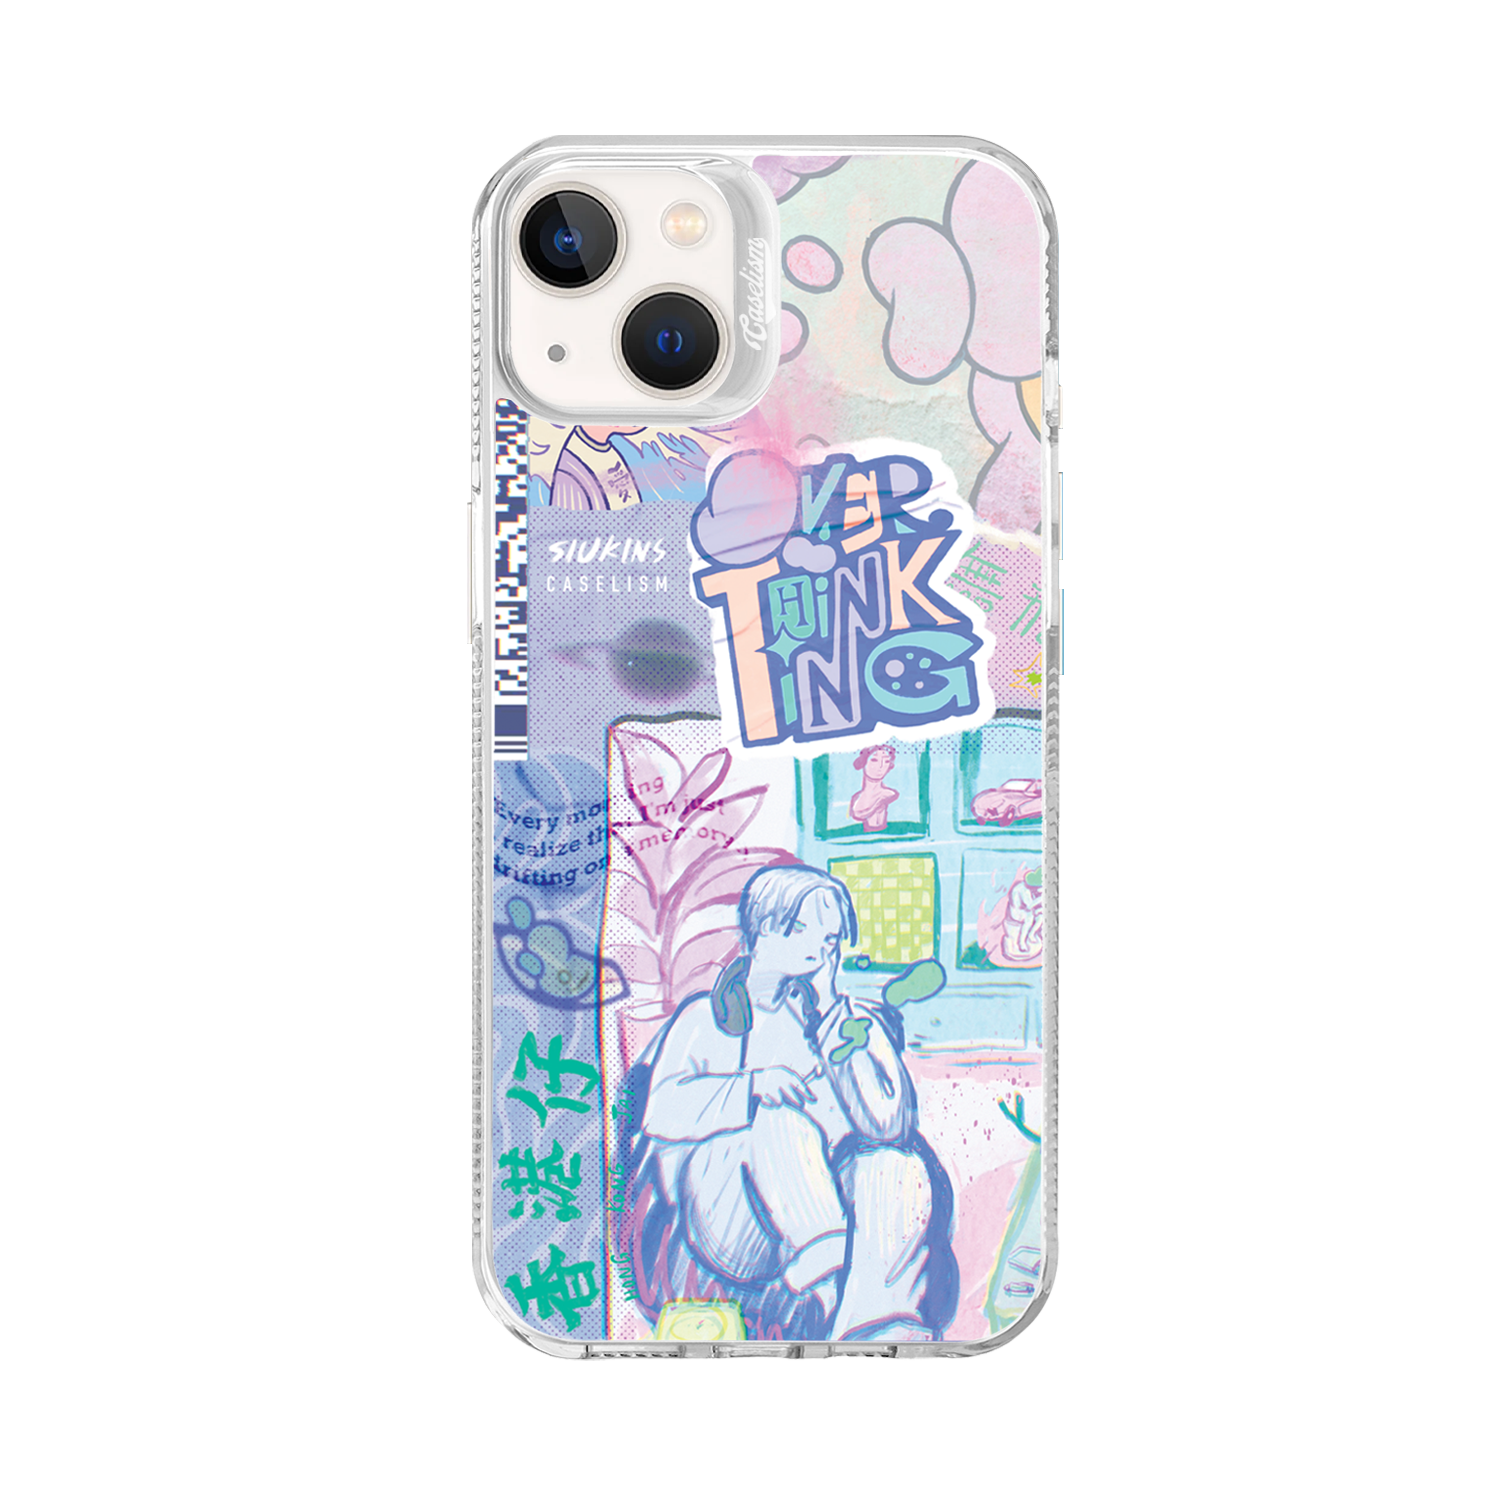 KINS004 - ColorLite Case for iPhone